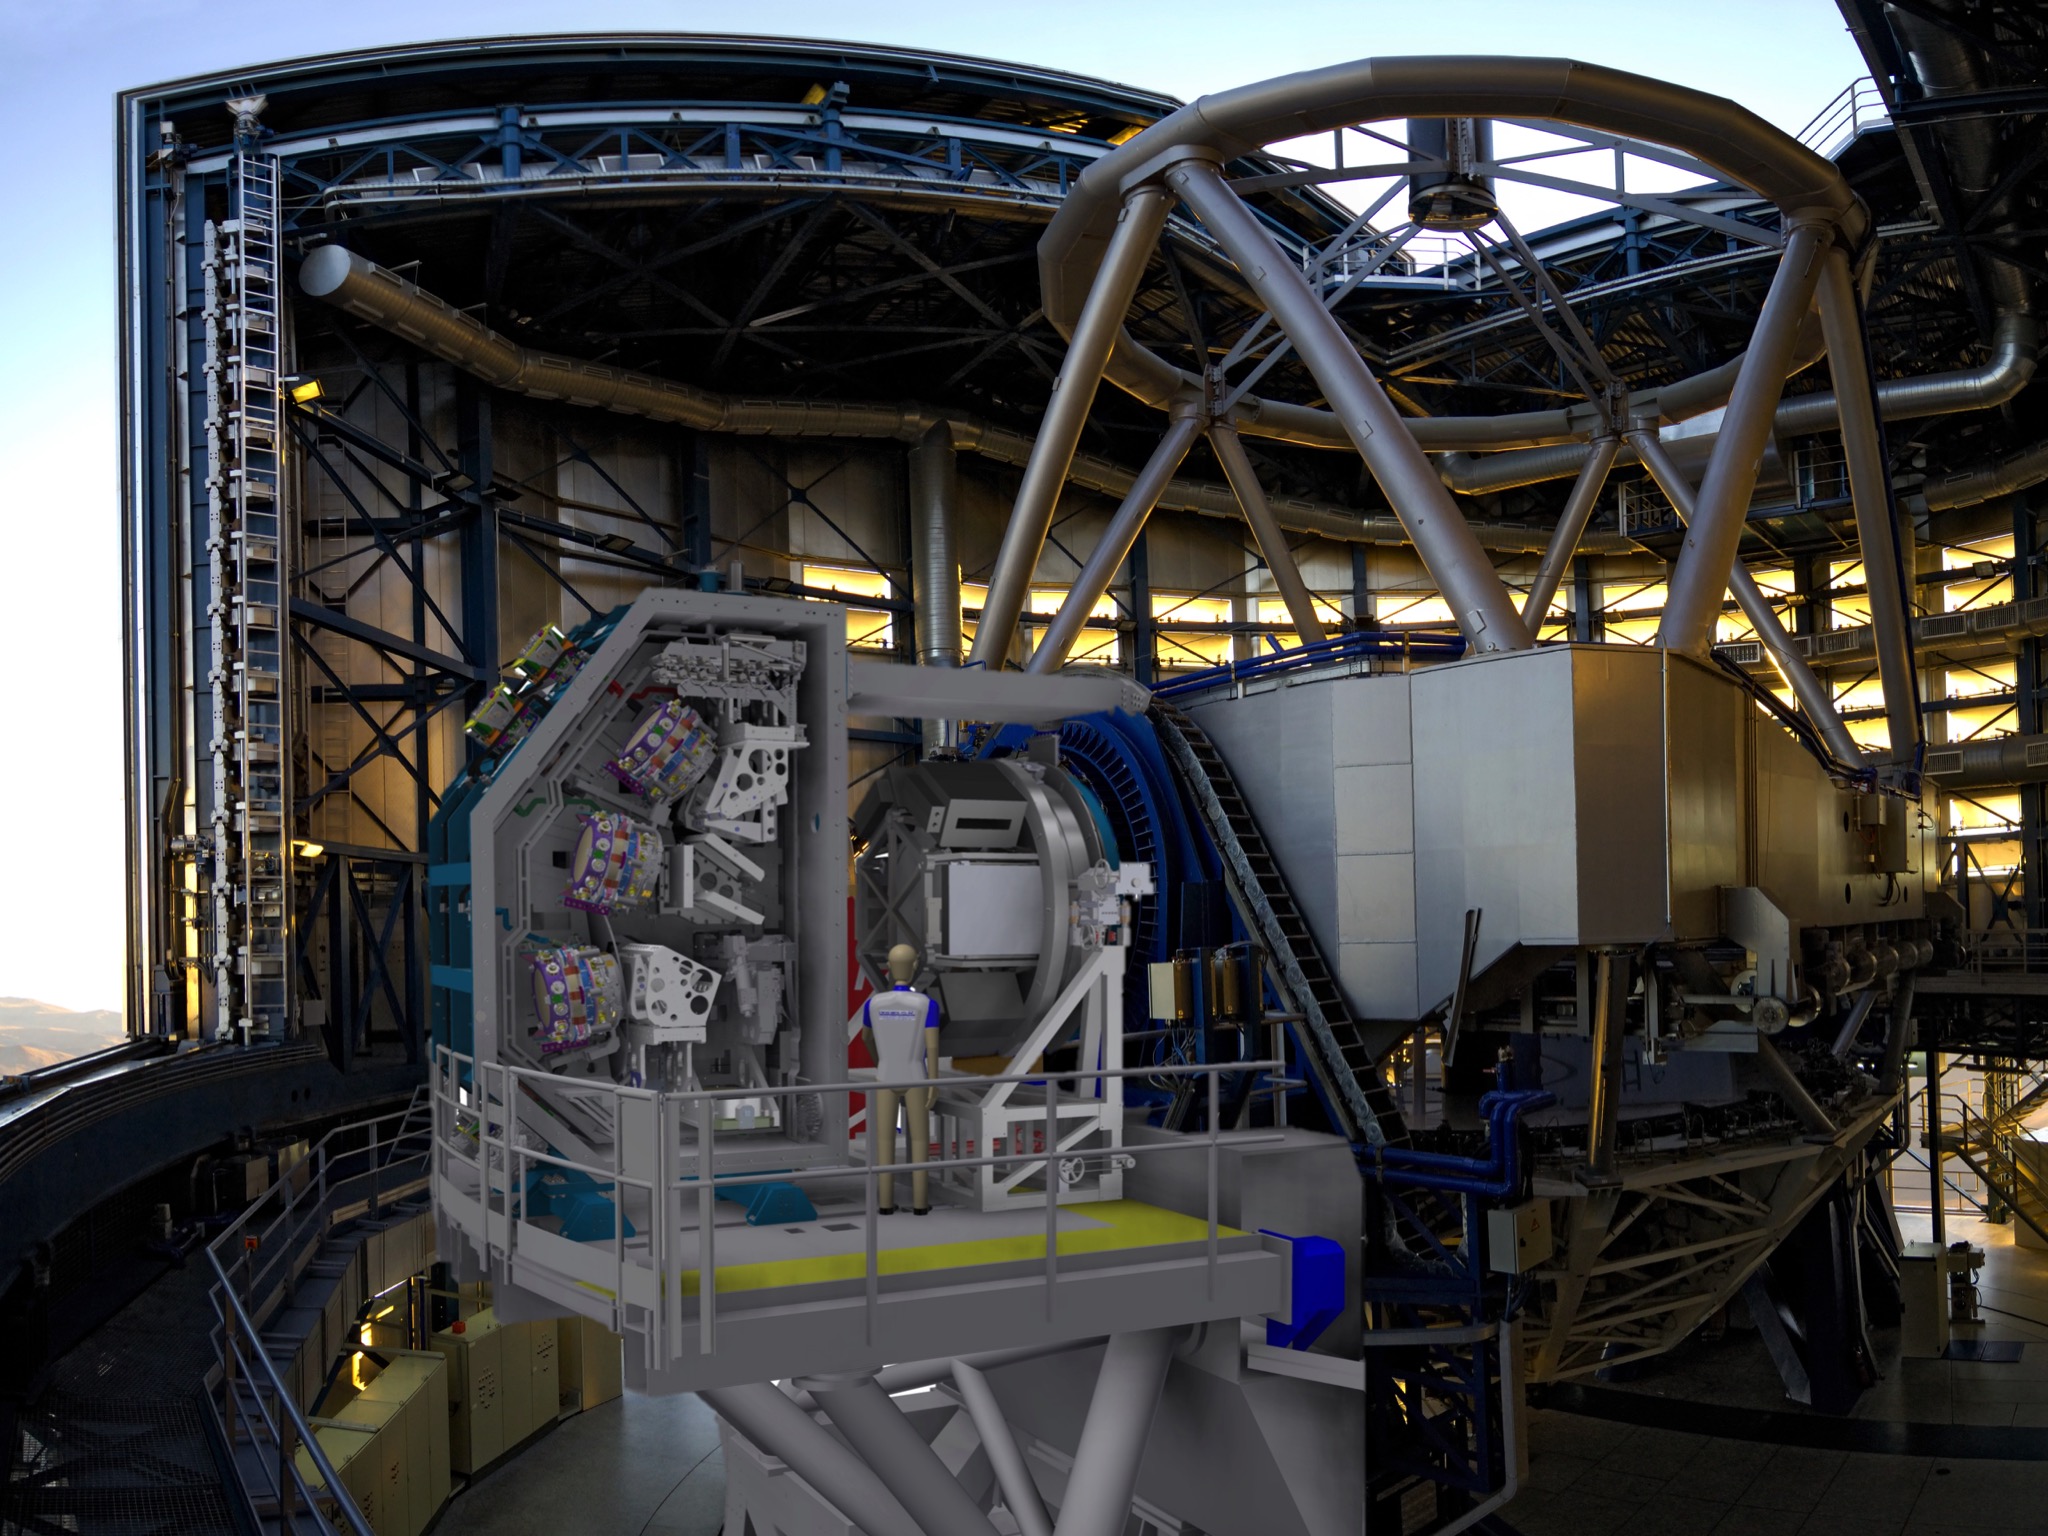 MOONS at VLT in British astronomers use motion technology from FAULHABER in a new MOONS project